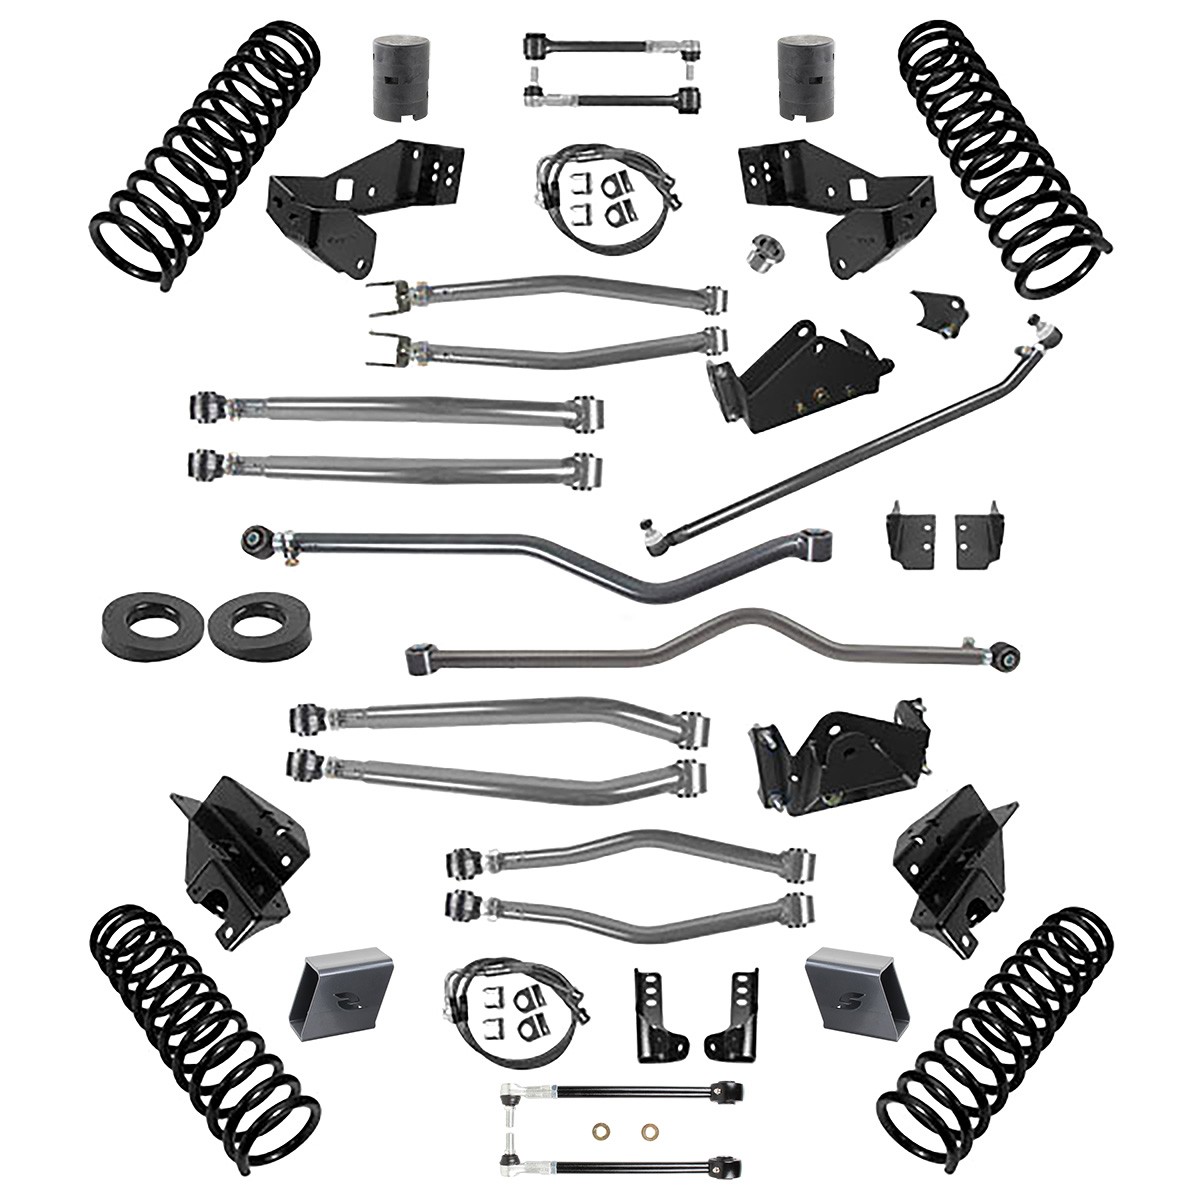 Synergy Jeep JK Stage 4 Long Arm Suspension System, 4/4.5" Lift